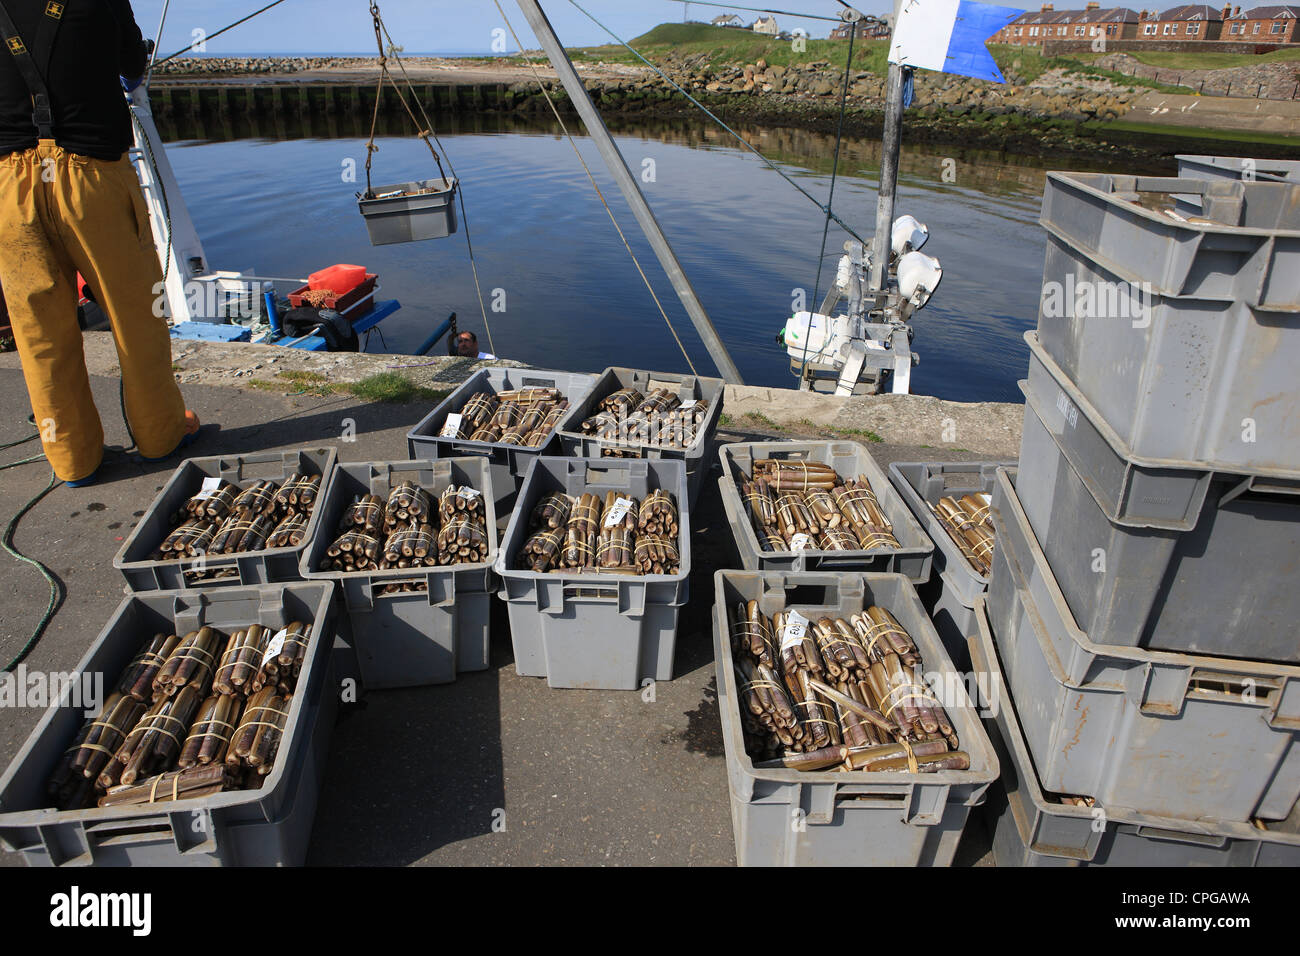 https://c8.alamy.com/comp/CPGAWA/crate-of-razor-clams-being-hoisted-off-a-fishing-boat-in-girvan-harbour-CPGAWA.jpg